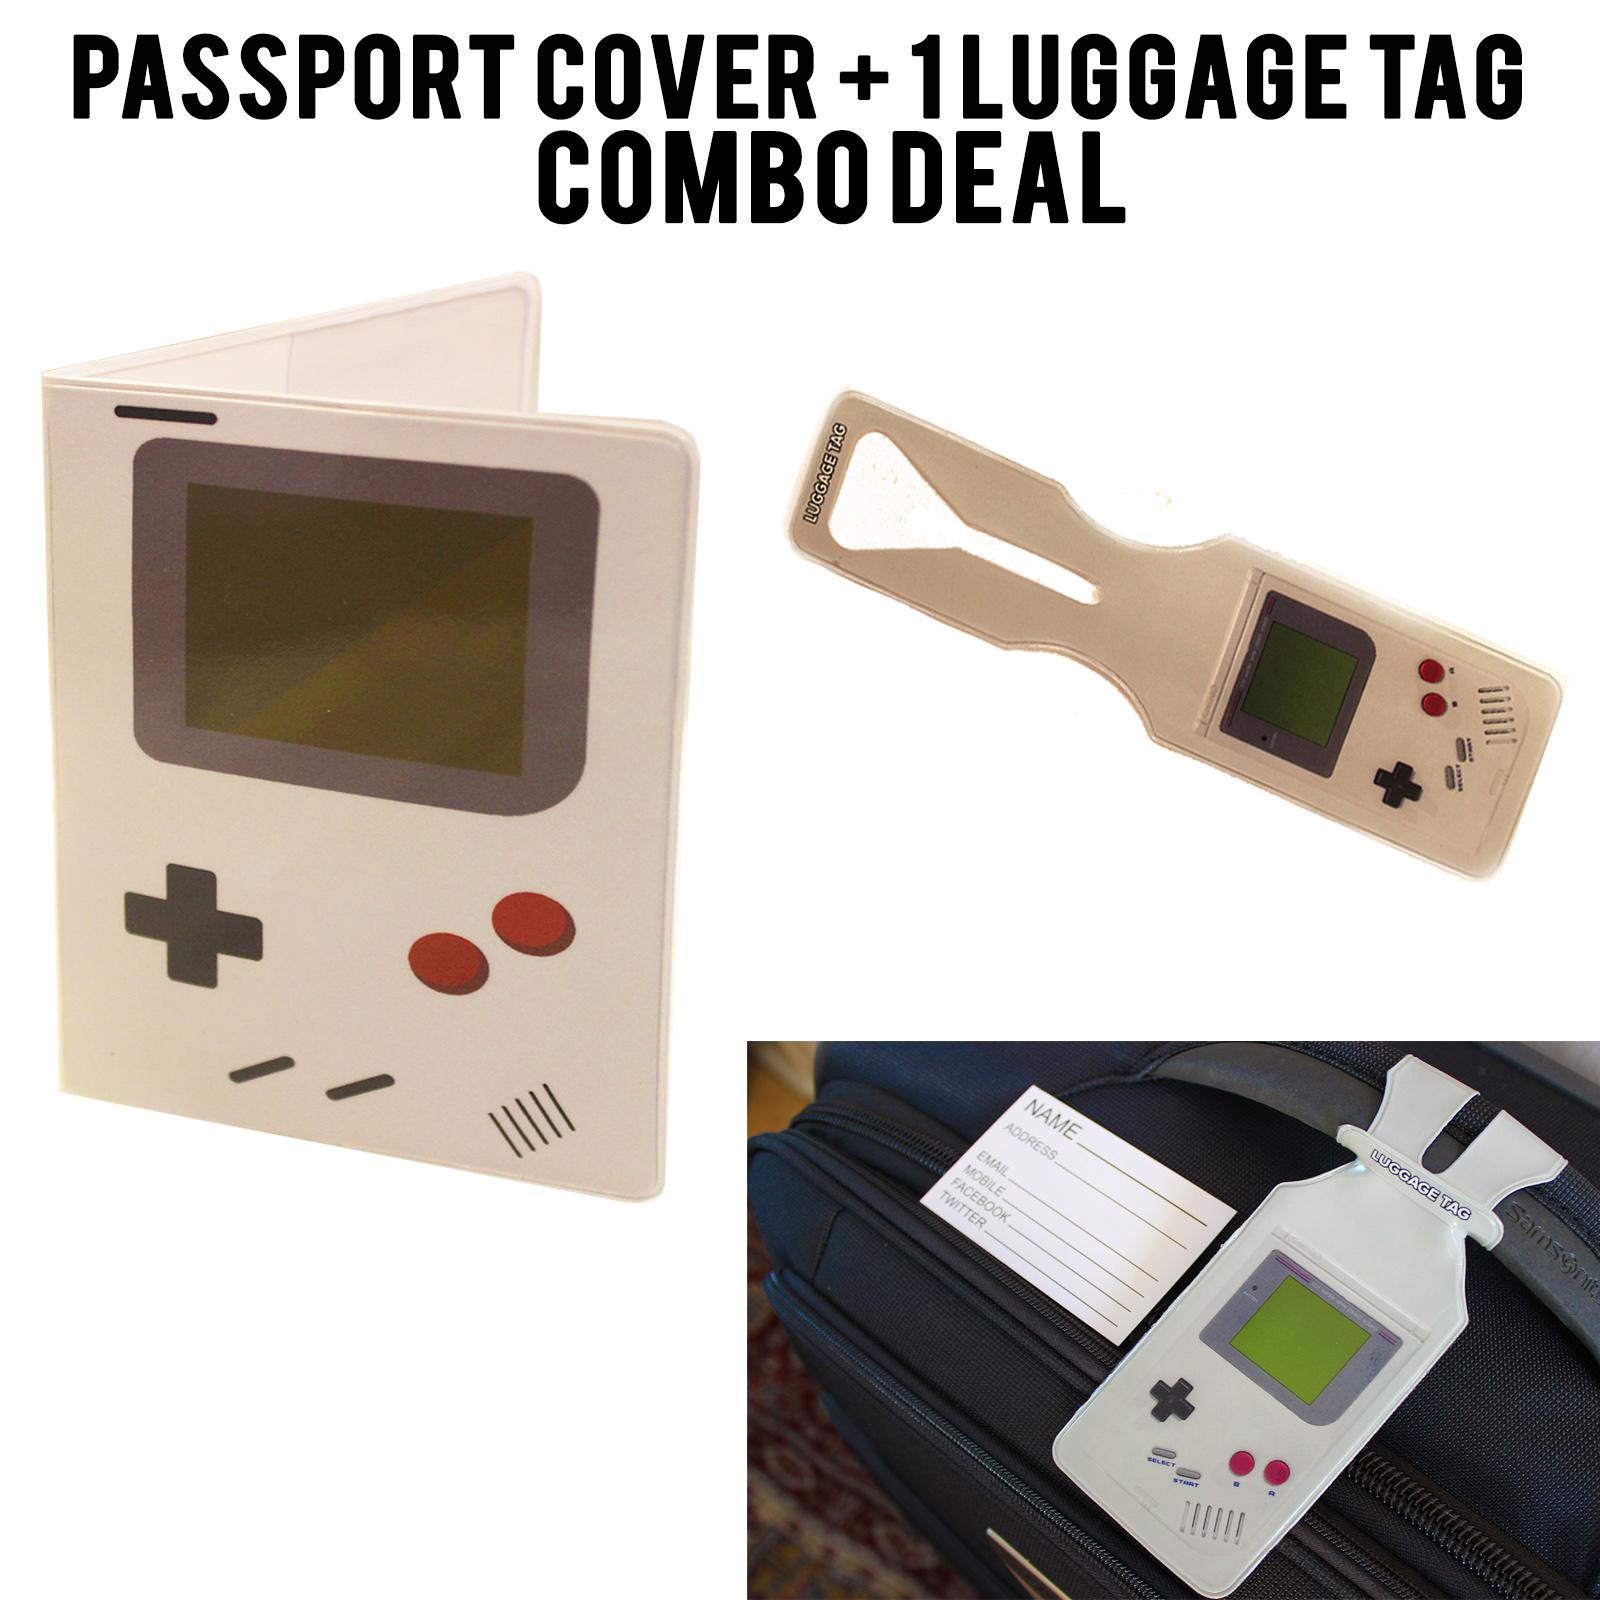 Gameboy Passport Cover and Luggage Tag Set annotated